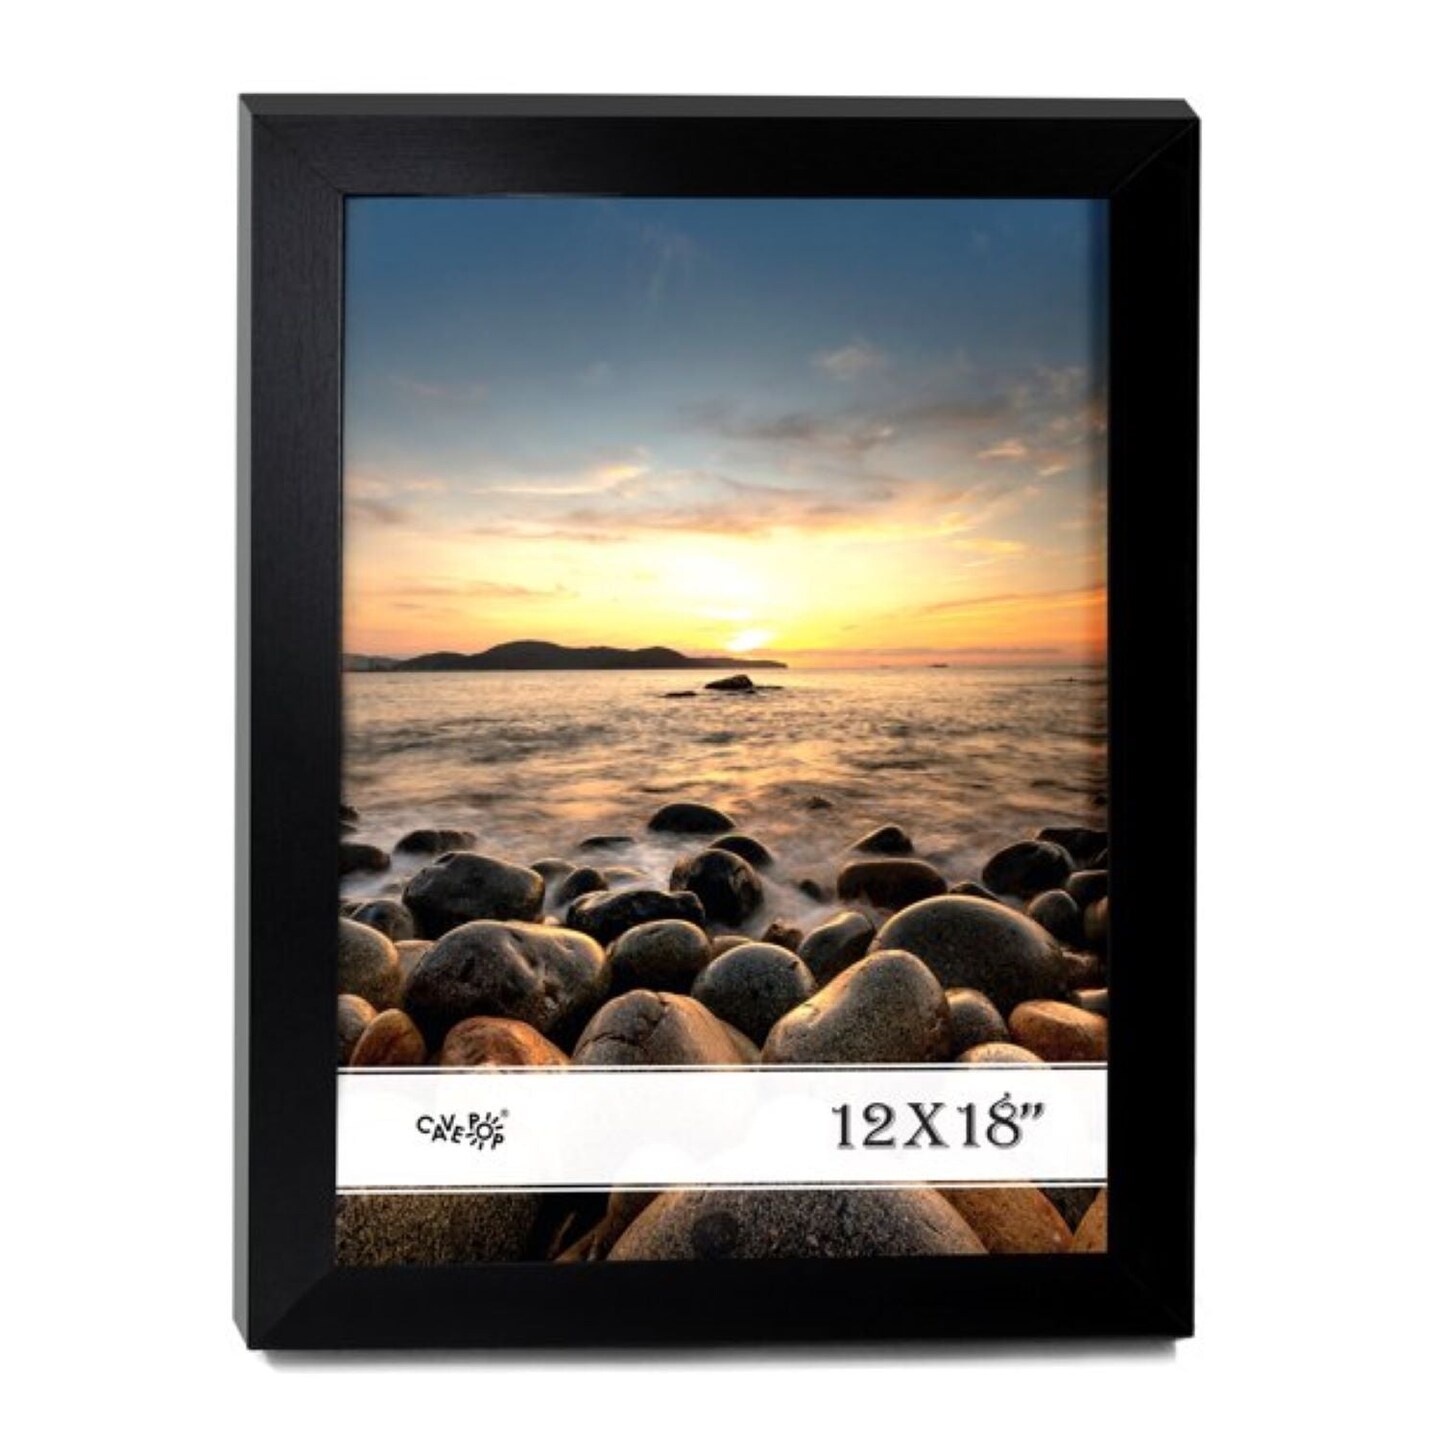 12x18 Black Wood Picture Frame with Polished Plexiglass